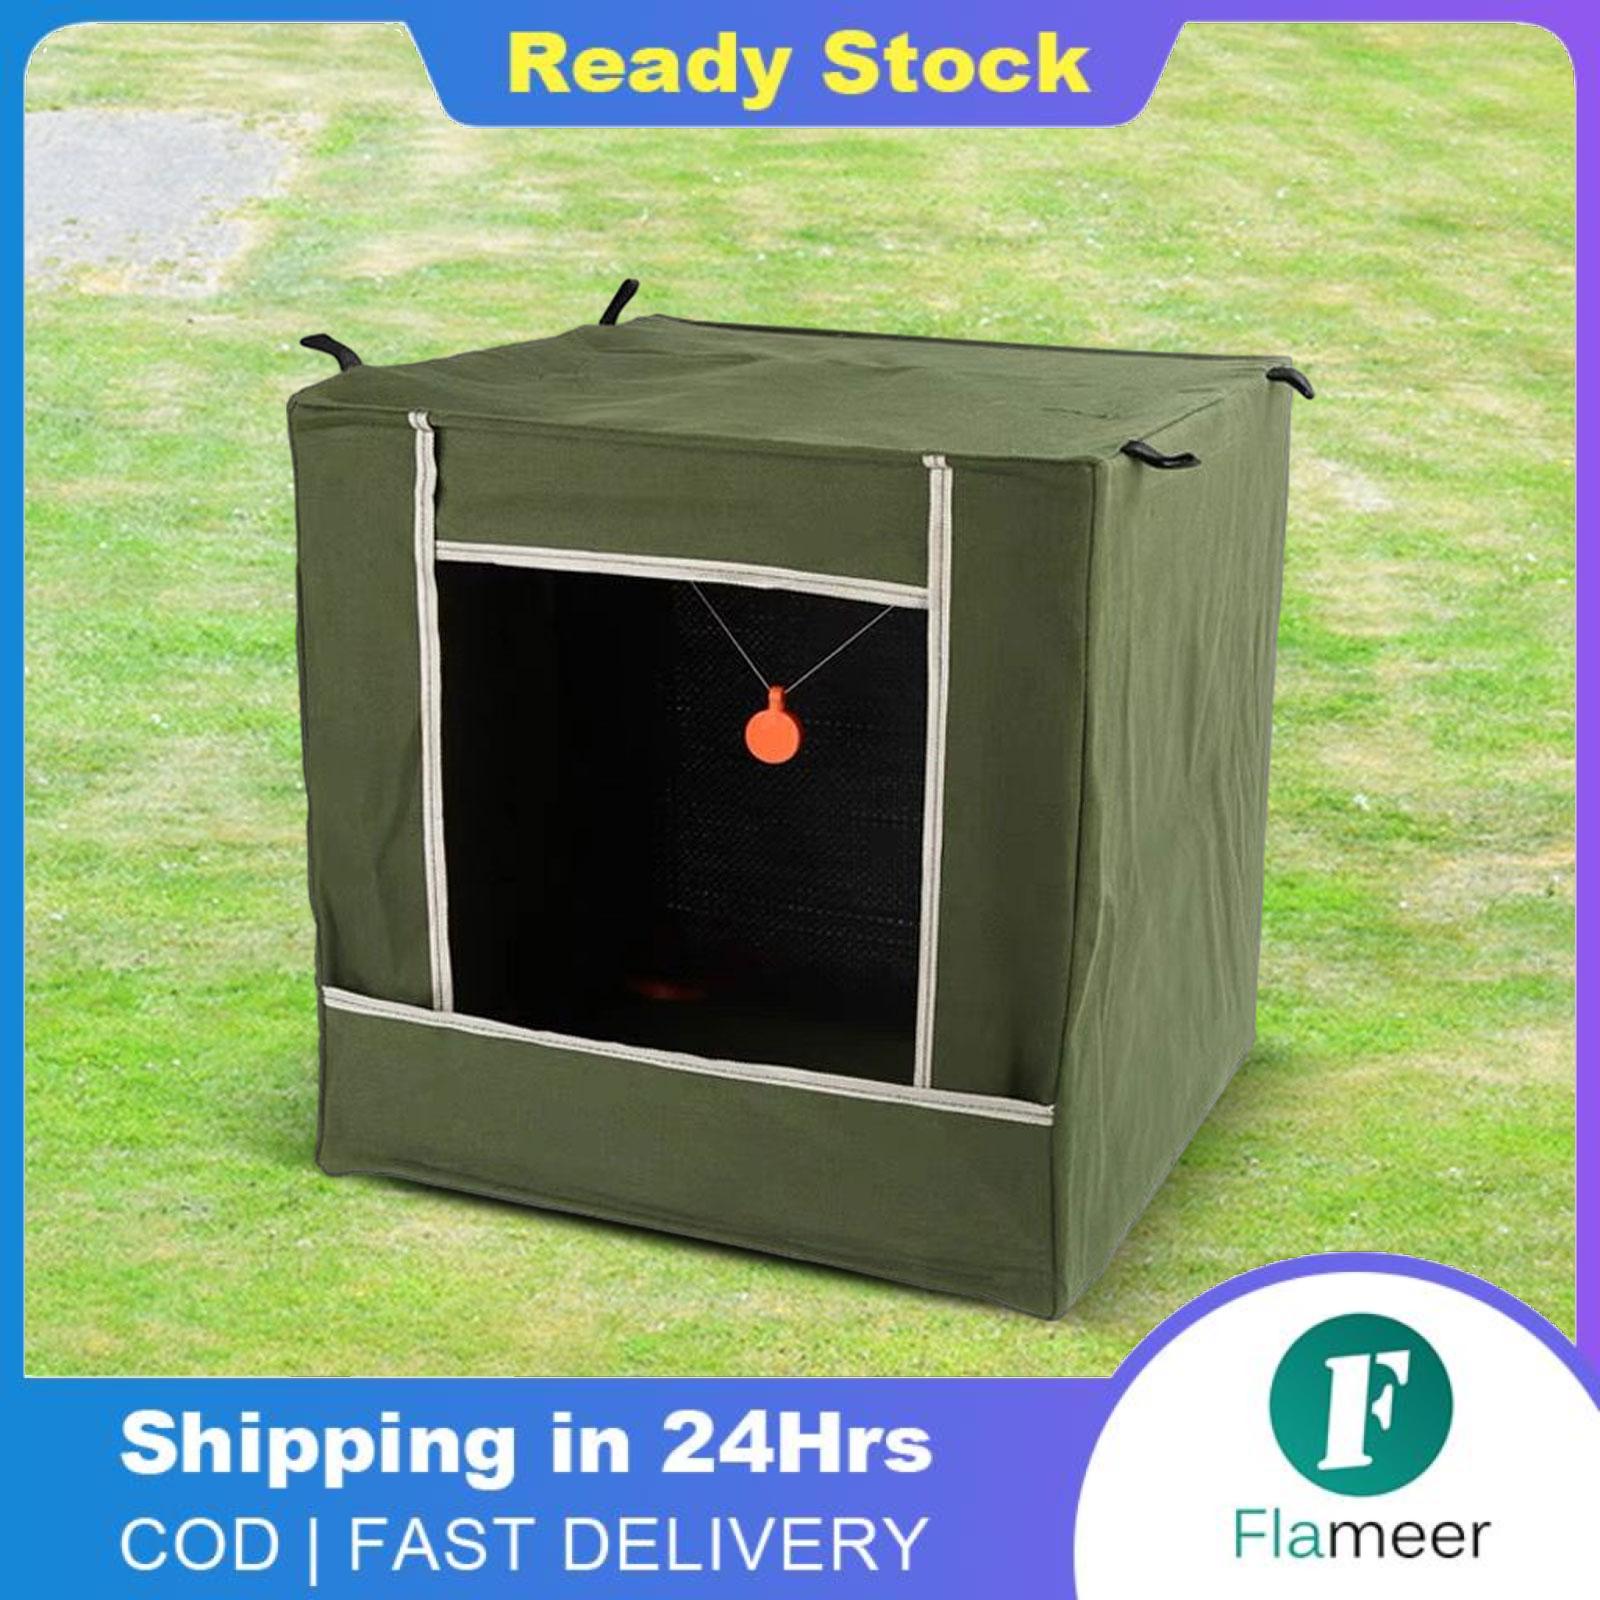 Flameer Target Box Soundproof 40x40cm Foldable Canvas Storage Box for